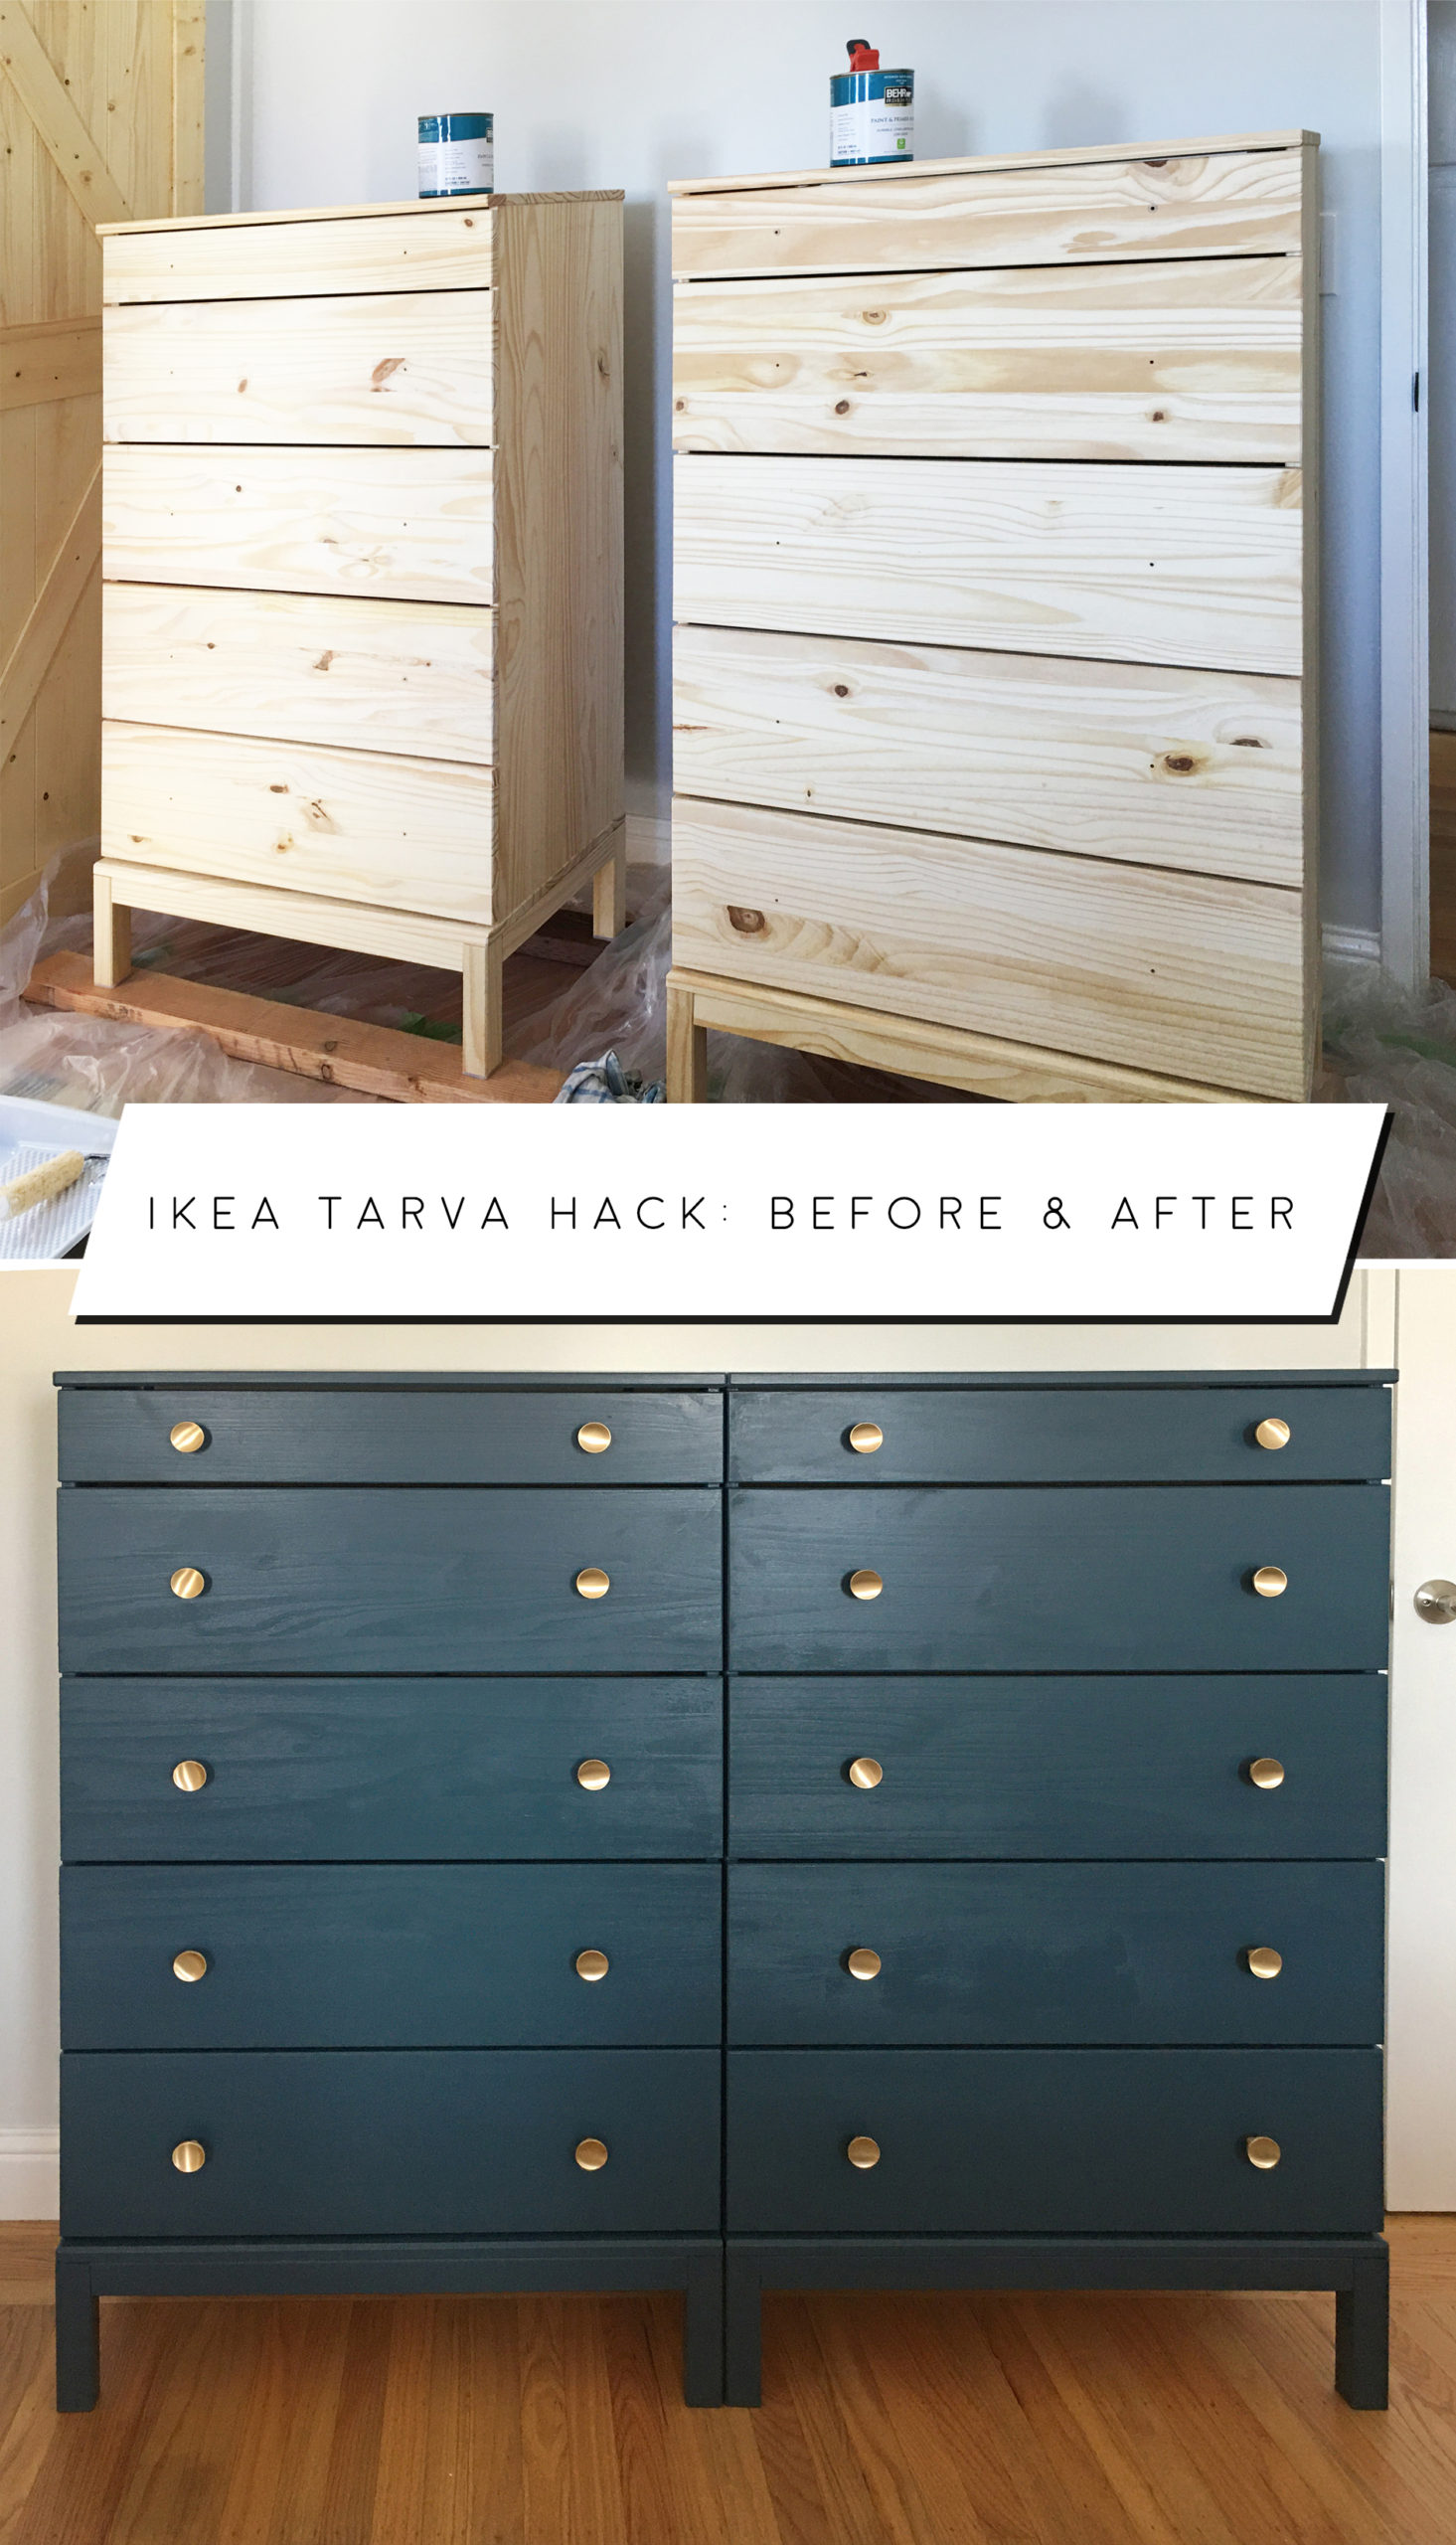 IKEA Tarva Hack Before and After